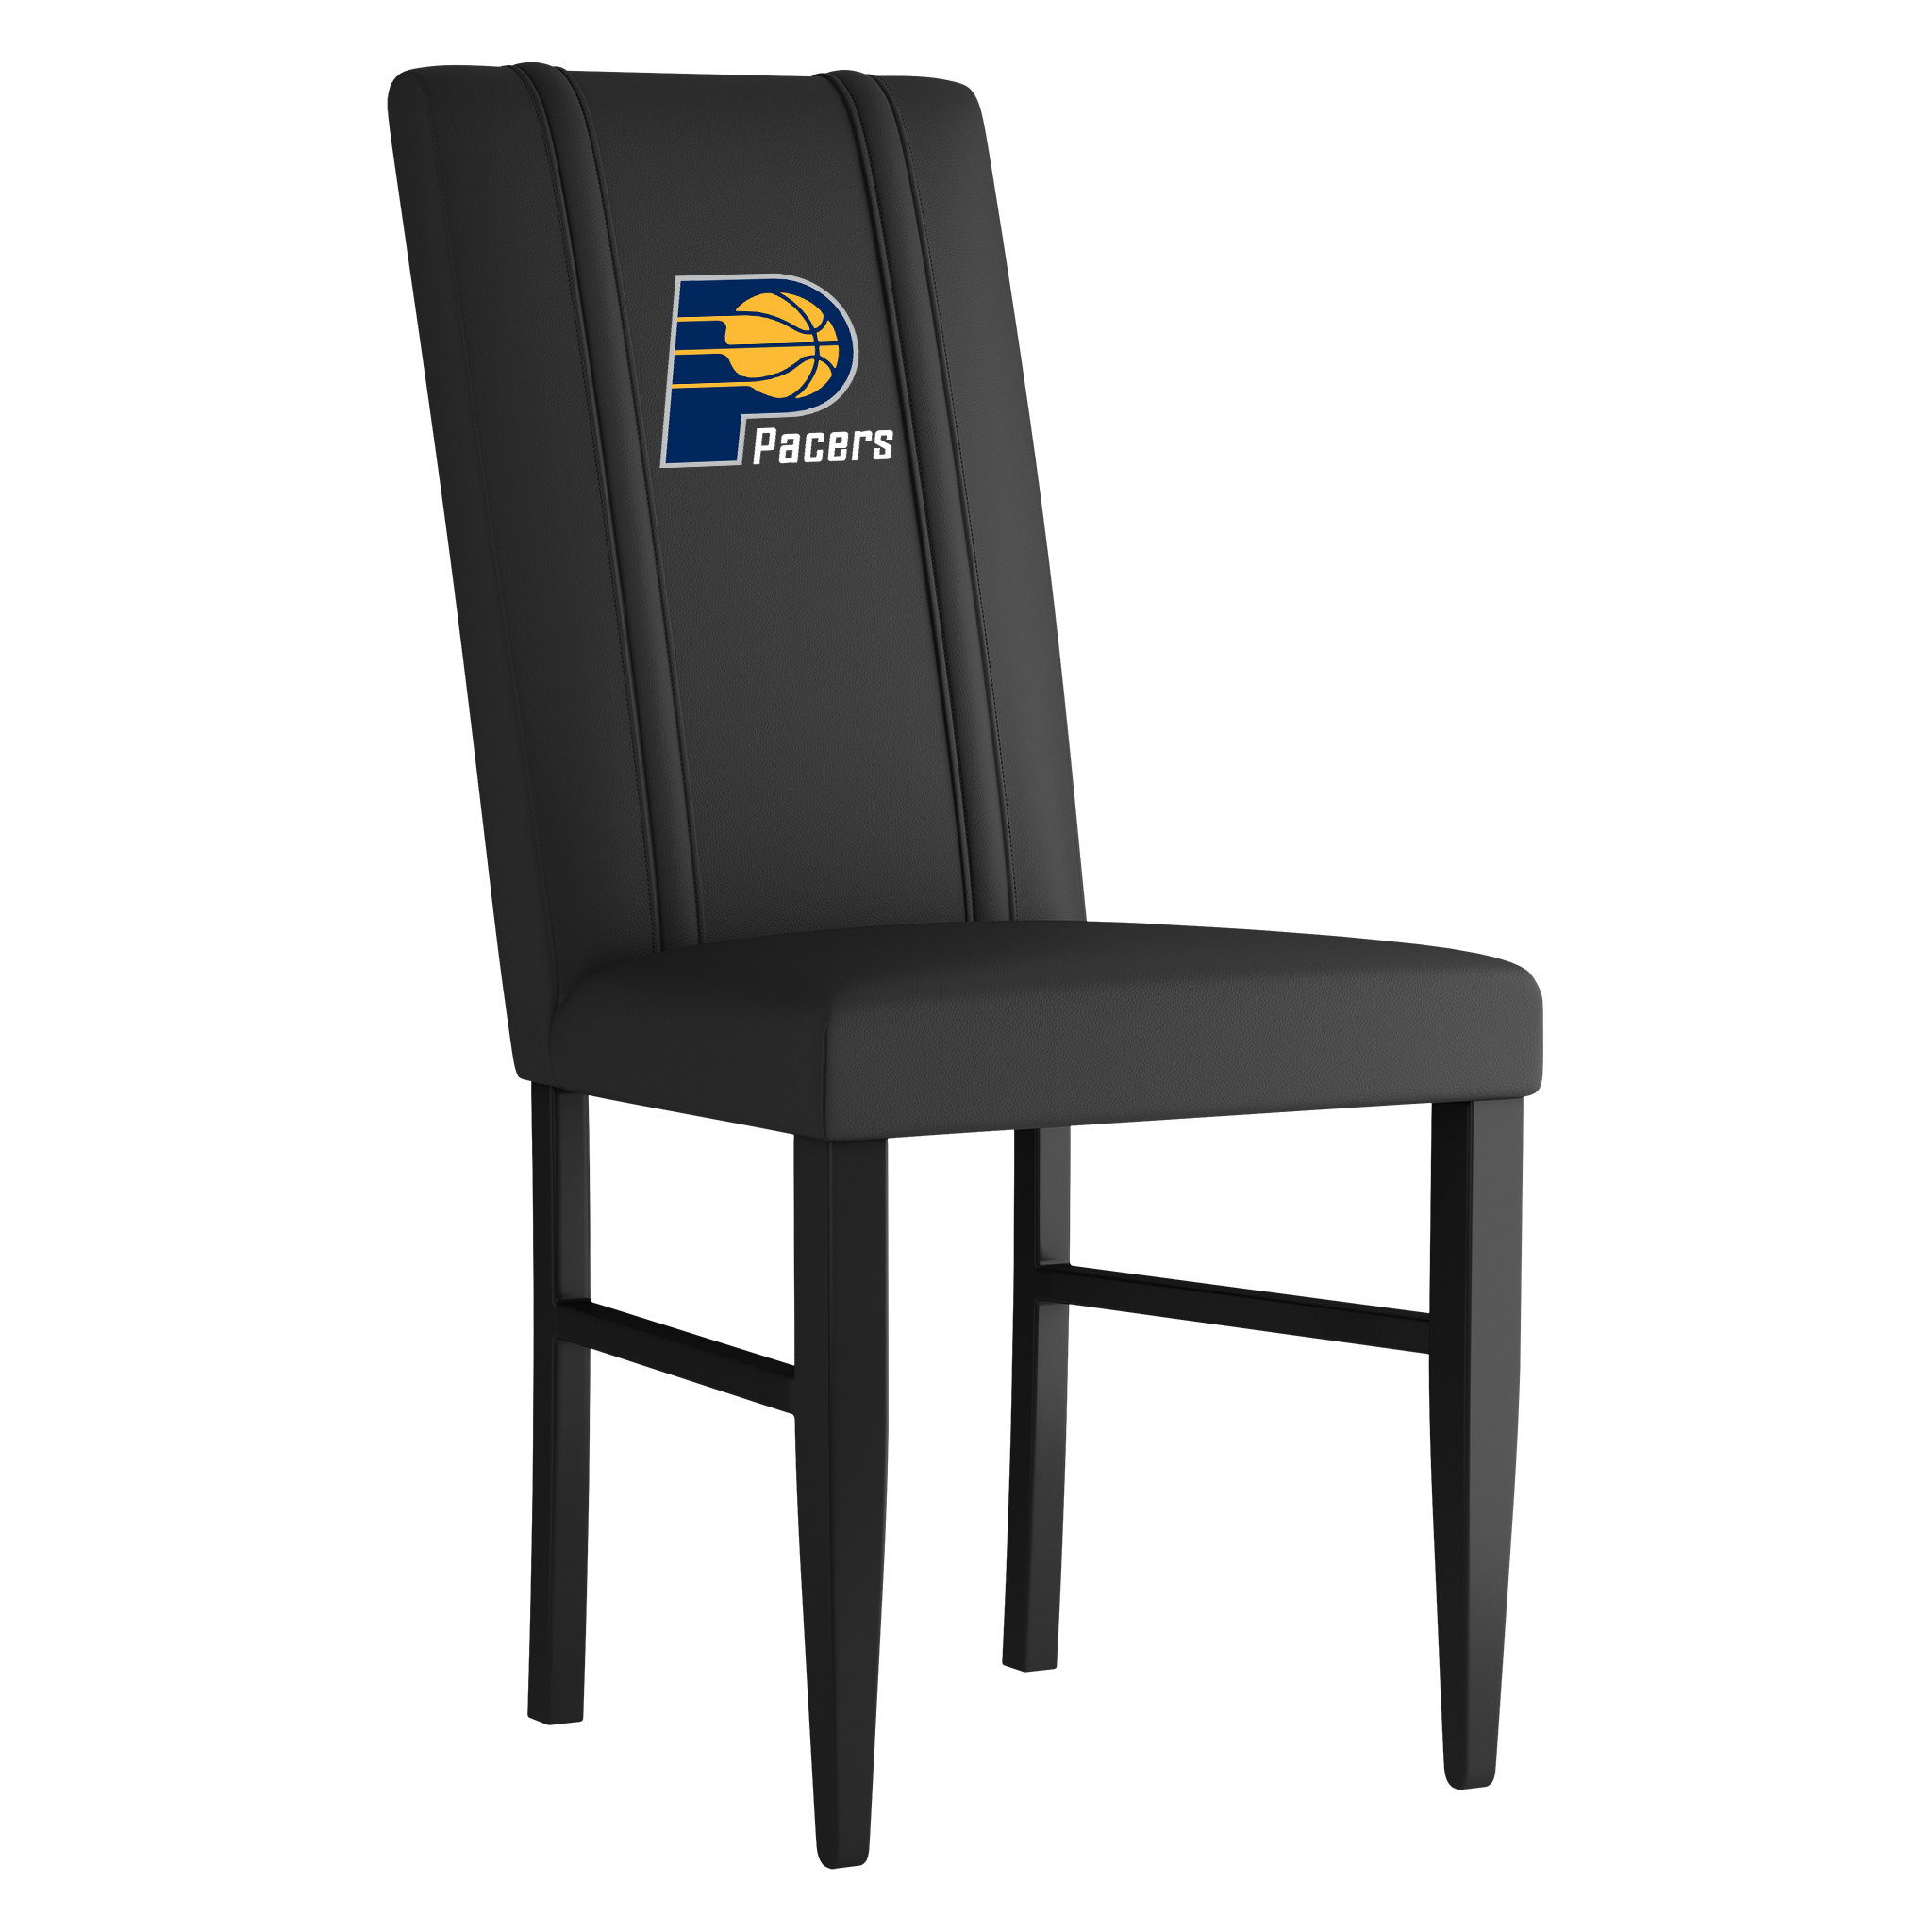 Indiana Pacers Side Chair 2000 Indiana Pacers Logo